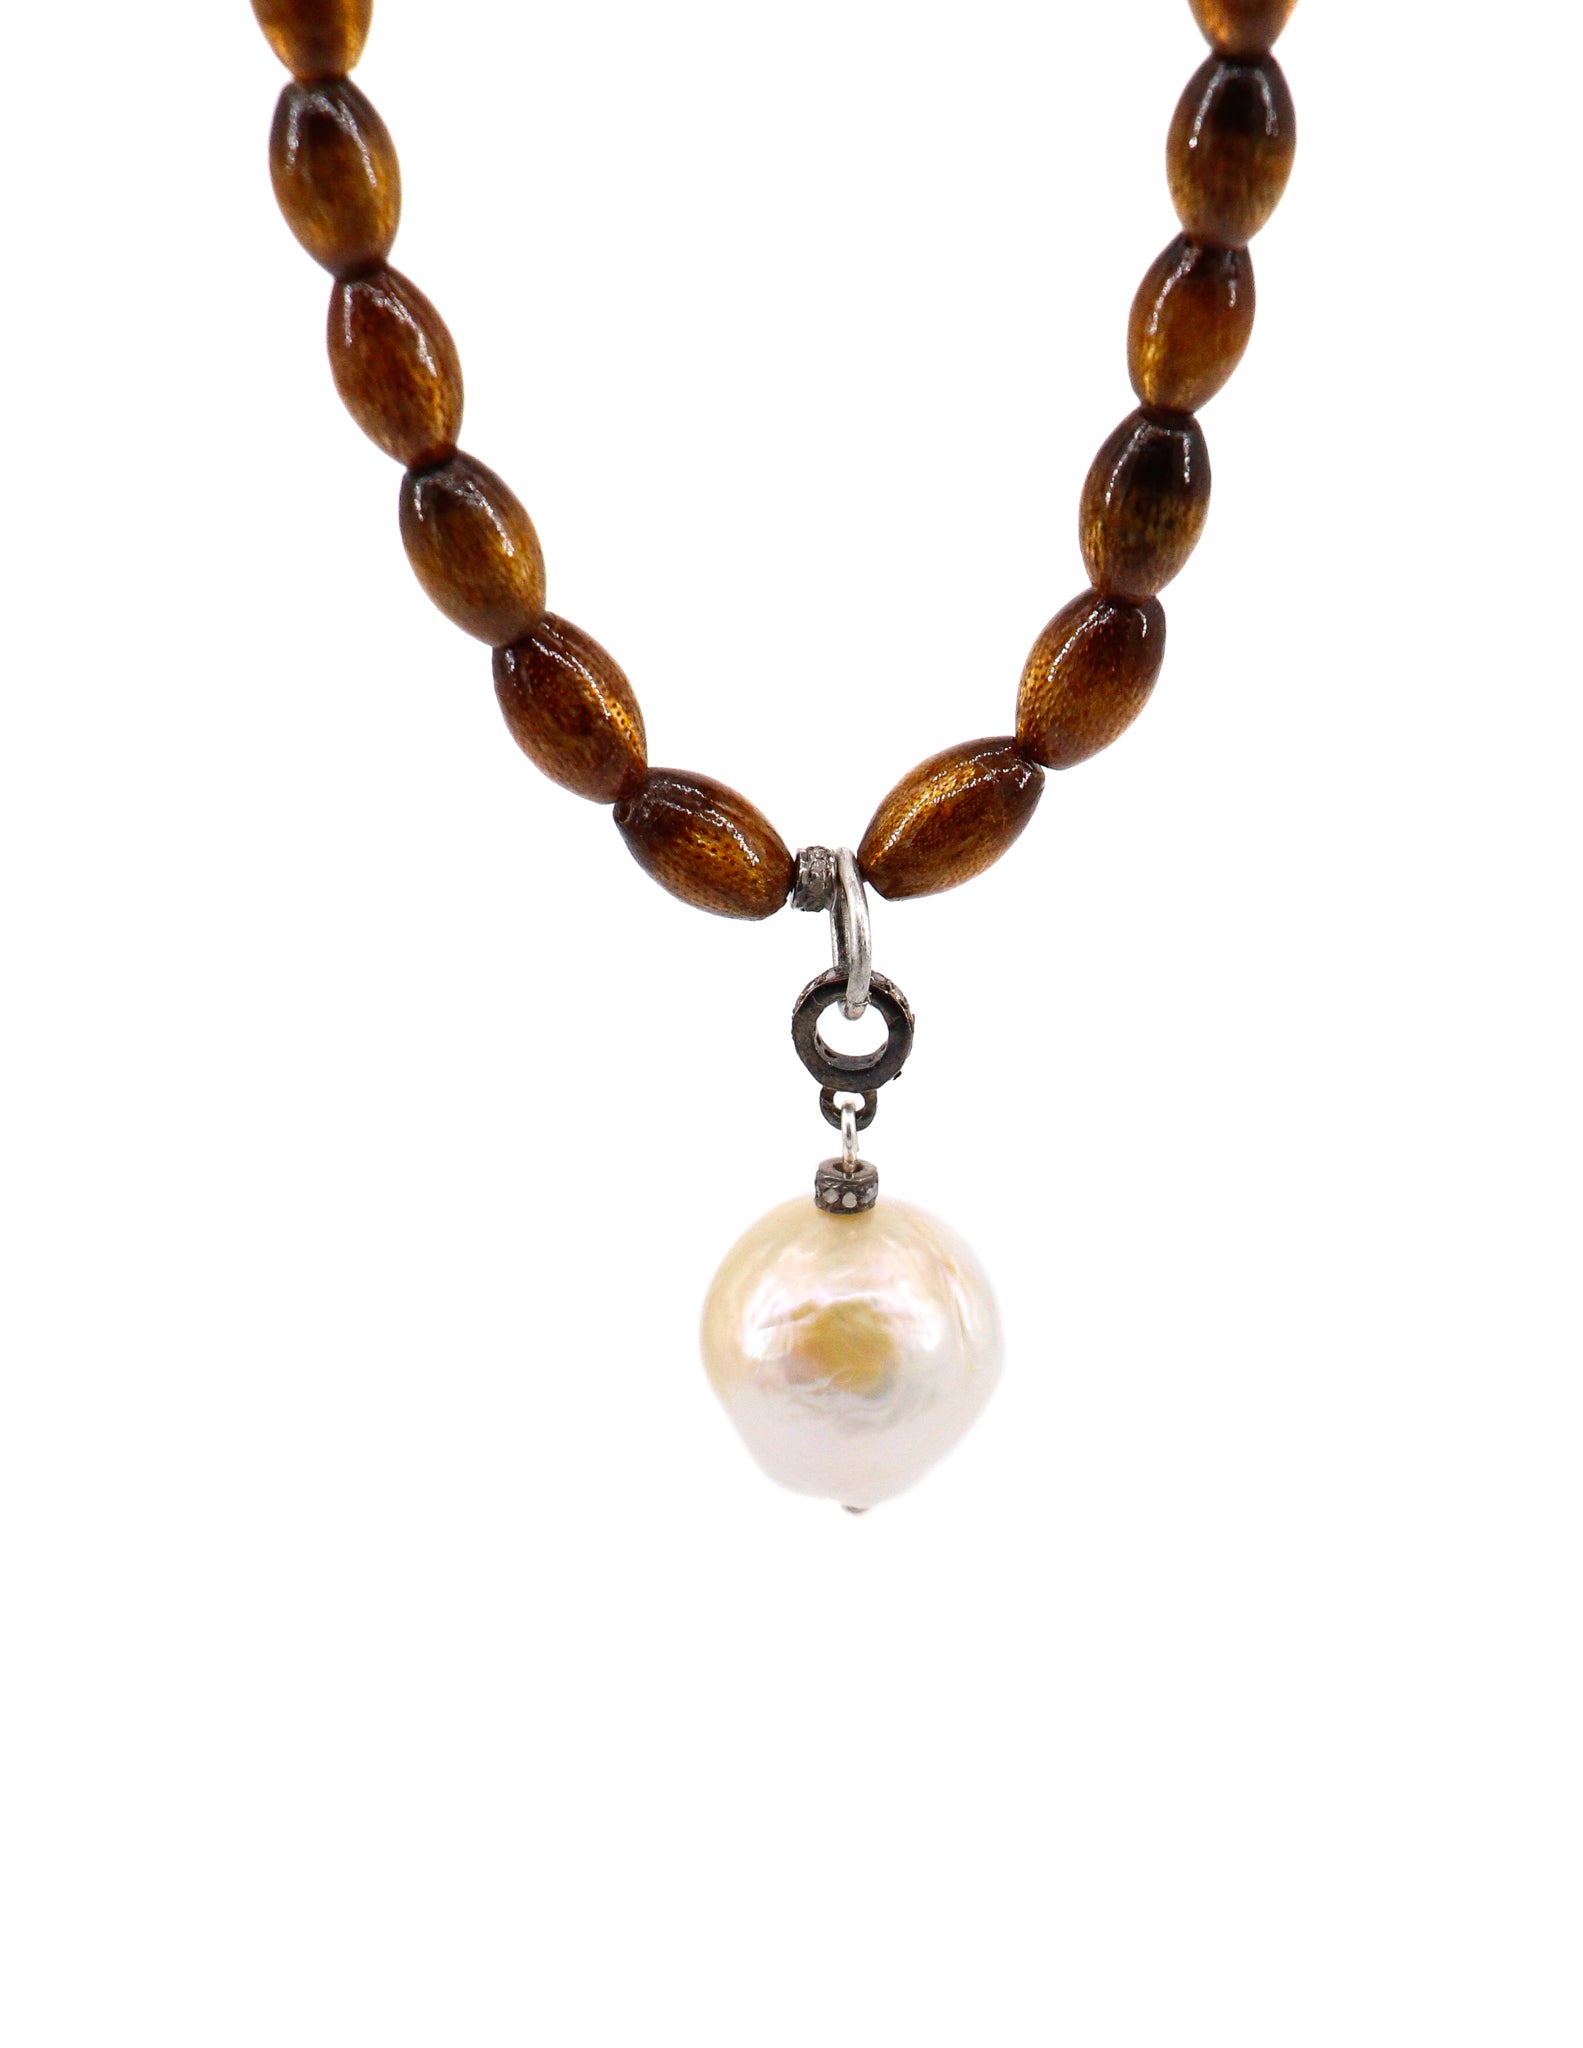 Gold coral necklace with a pearl pendant